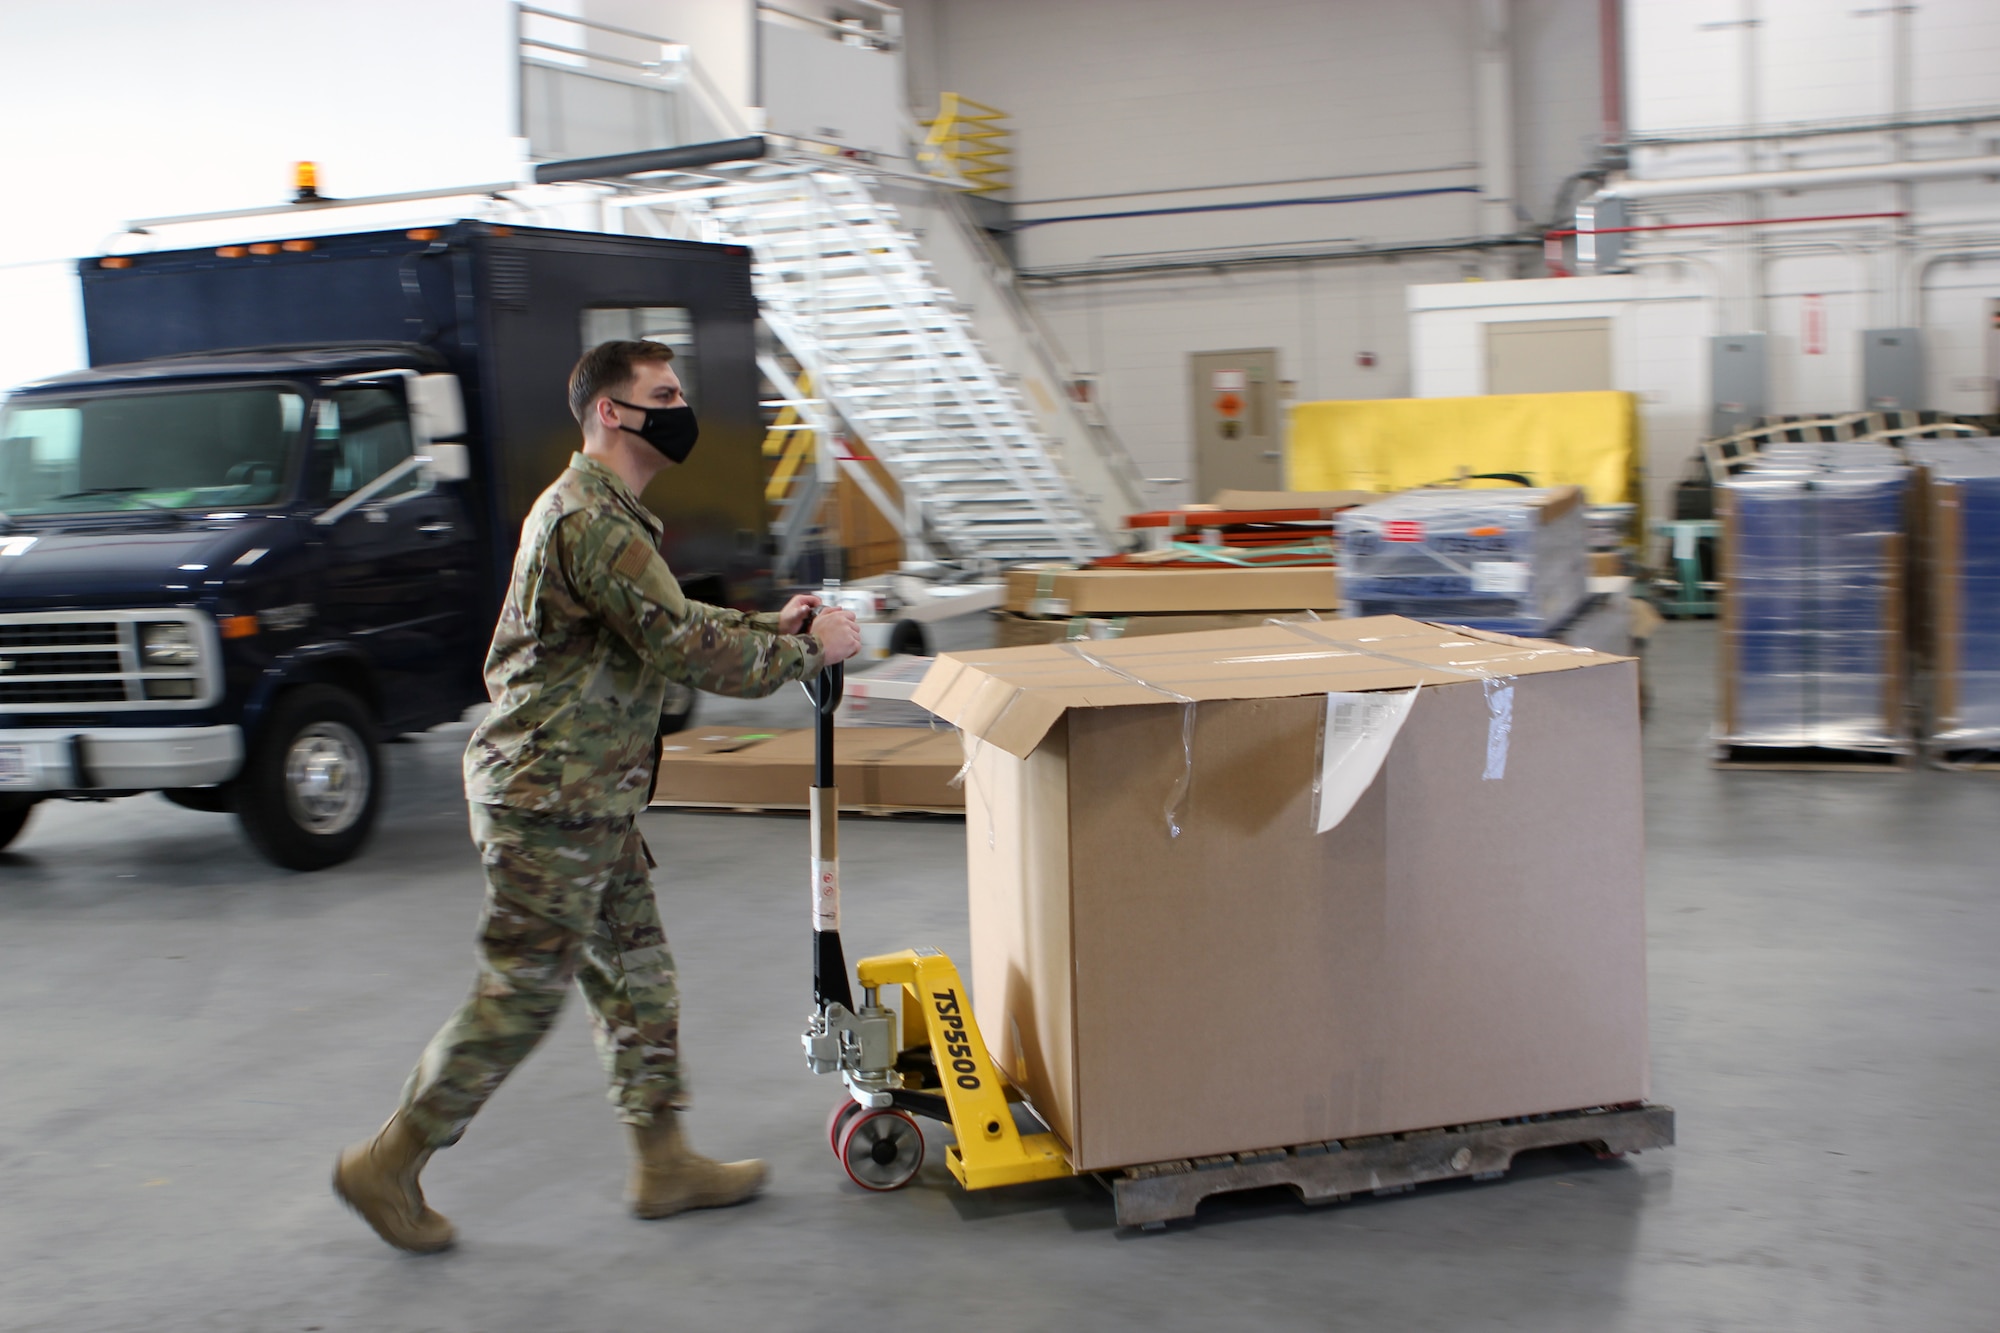 Senior Airman Jacob Milatz, a material management specialist with the 127th Logistics Readiness Squadron, moves a pallet of equipment in a warehouse at Selfridge Air National Guard Base, Mich., Jan. 9, 2020.  (U.S. Air National Guard photo by Master Sgt. Dan Heaton)